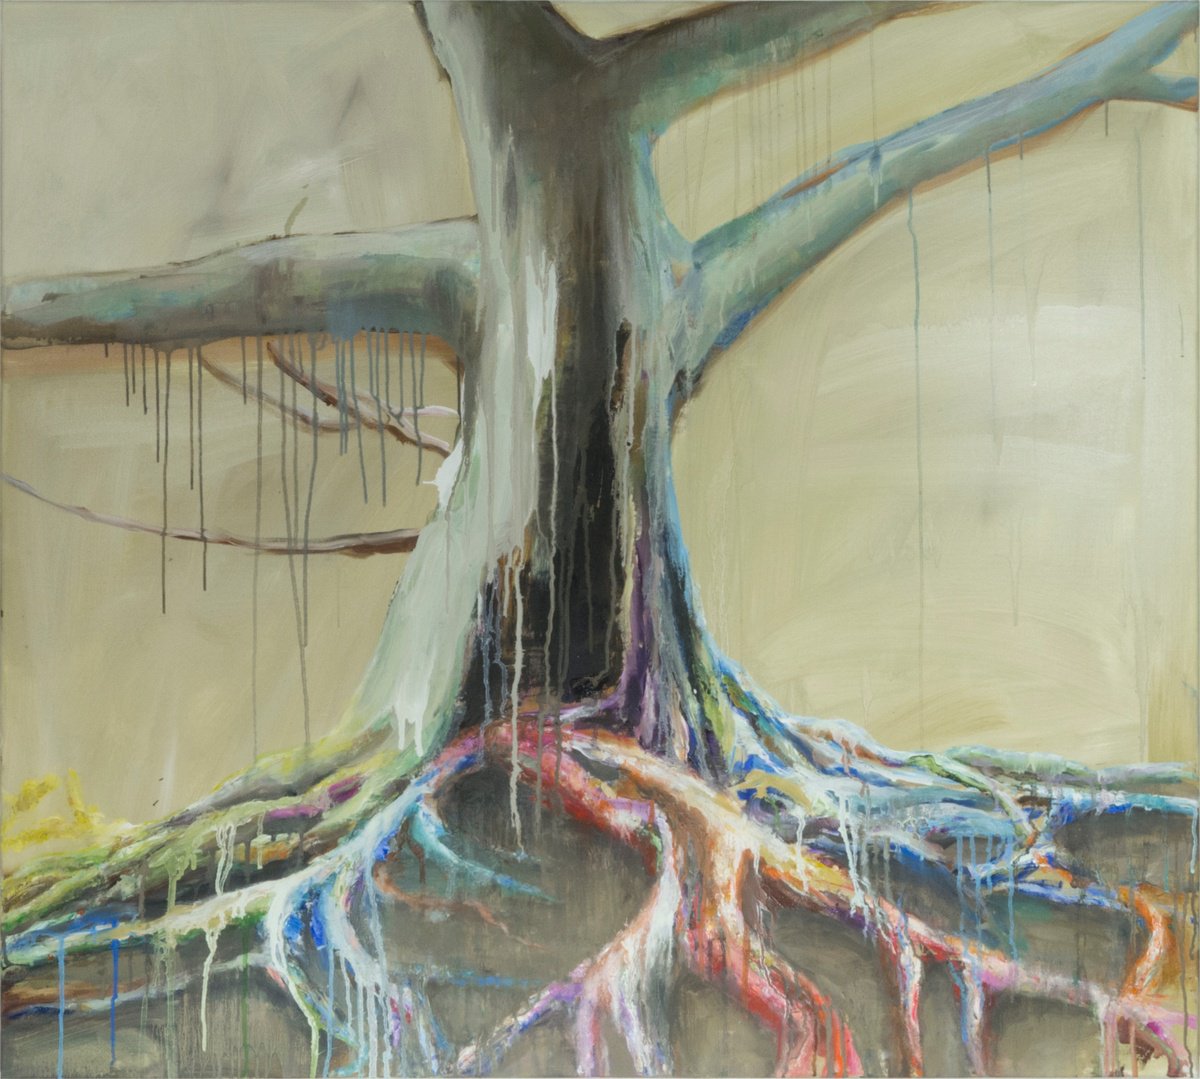 Roots by Lisa Braun